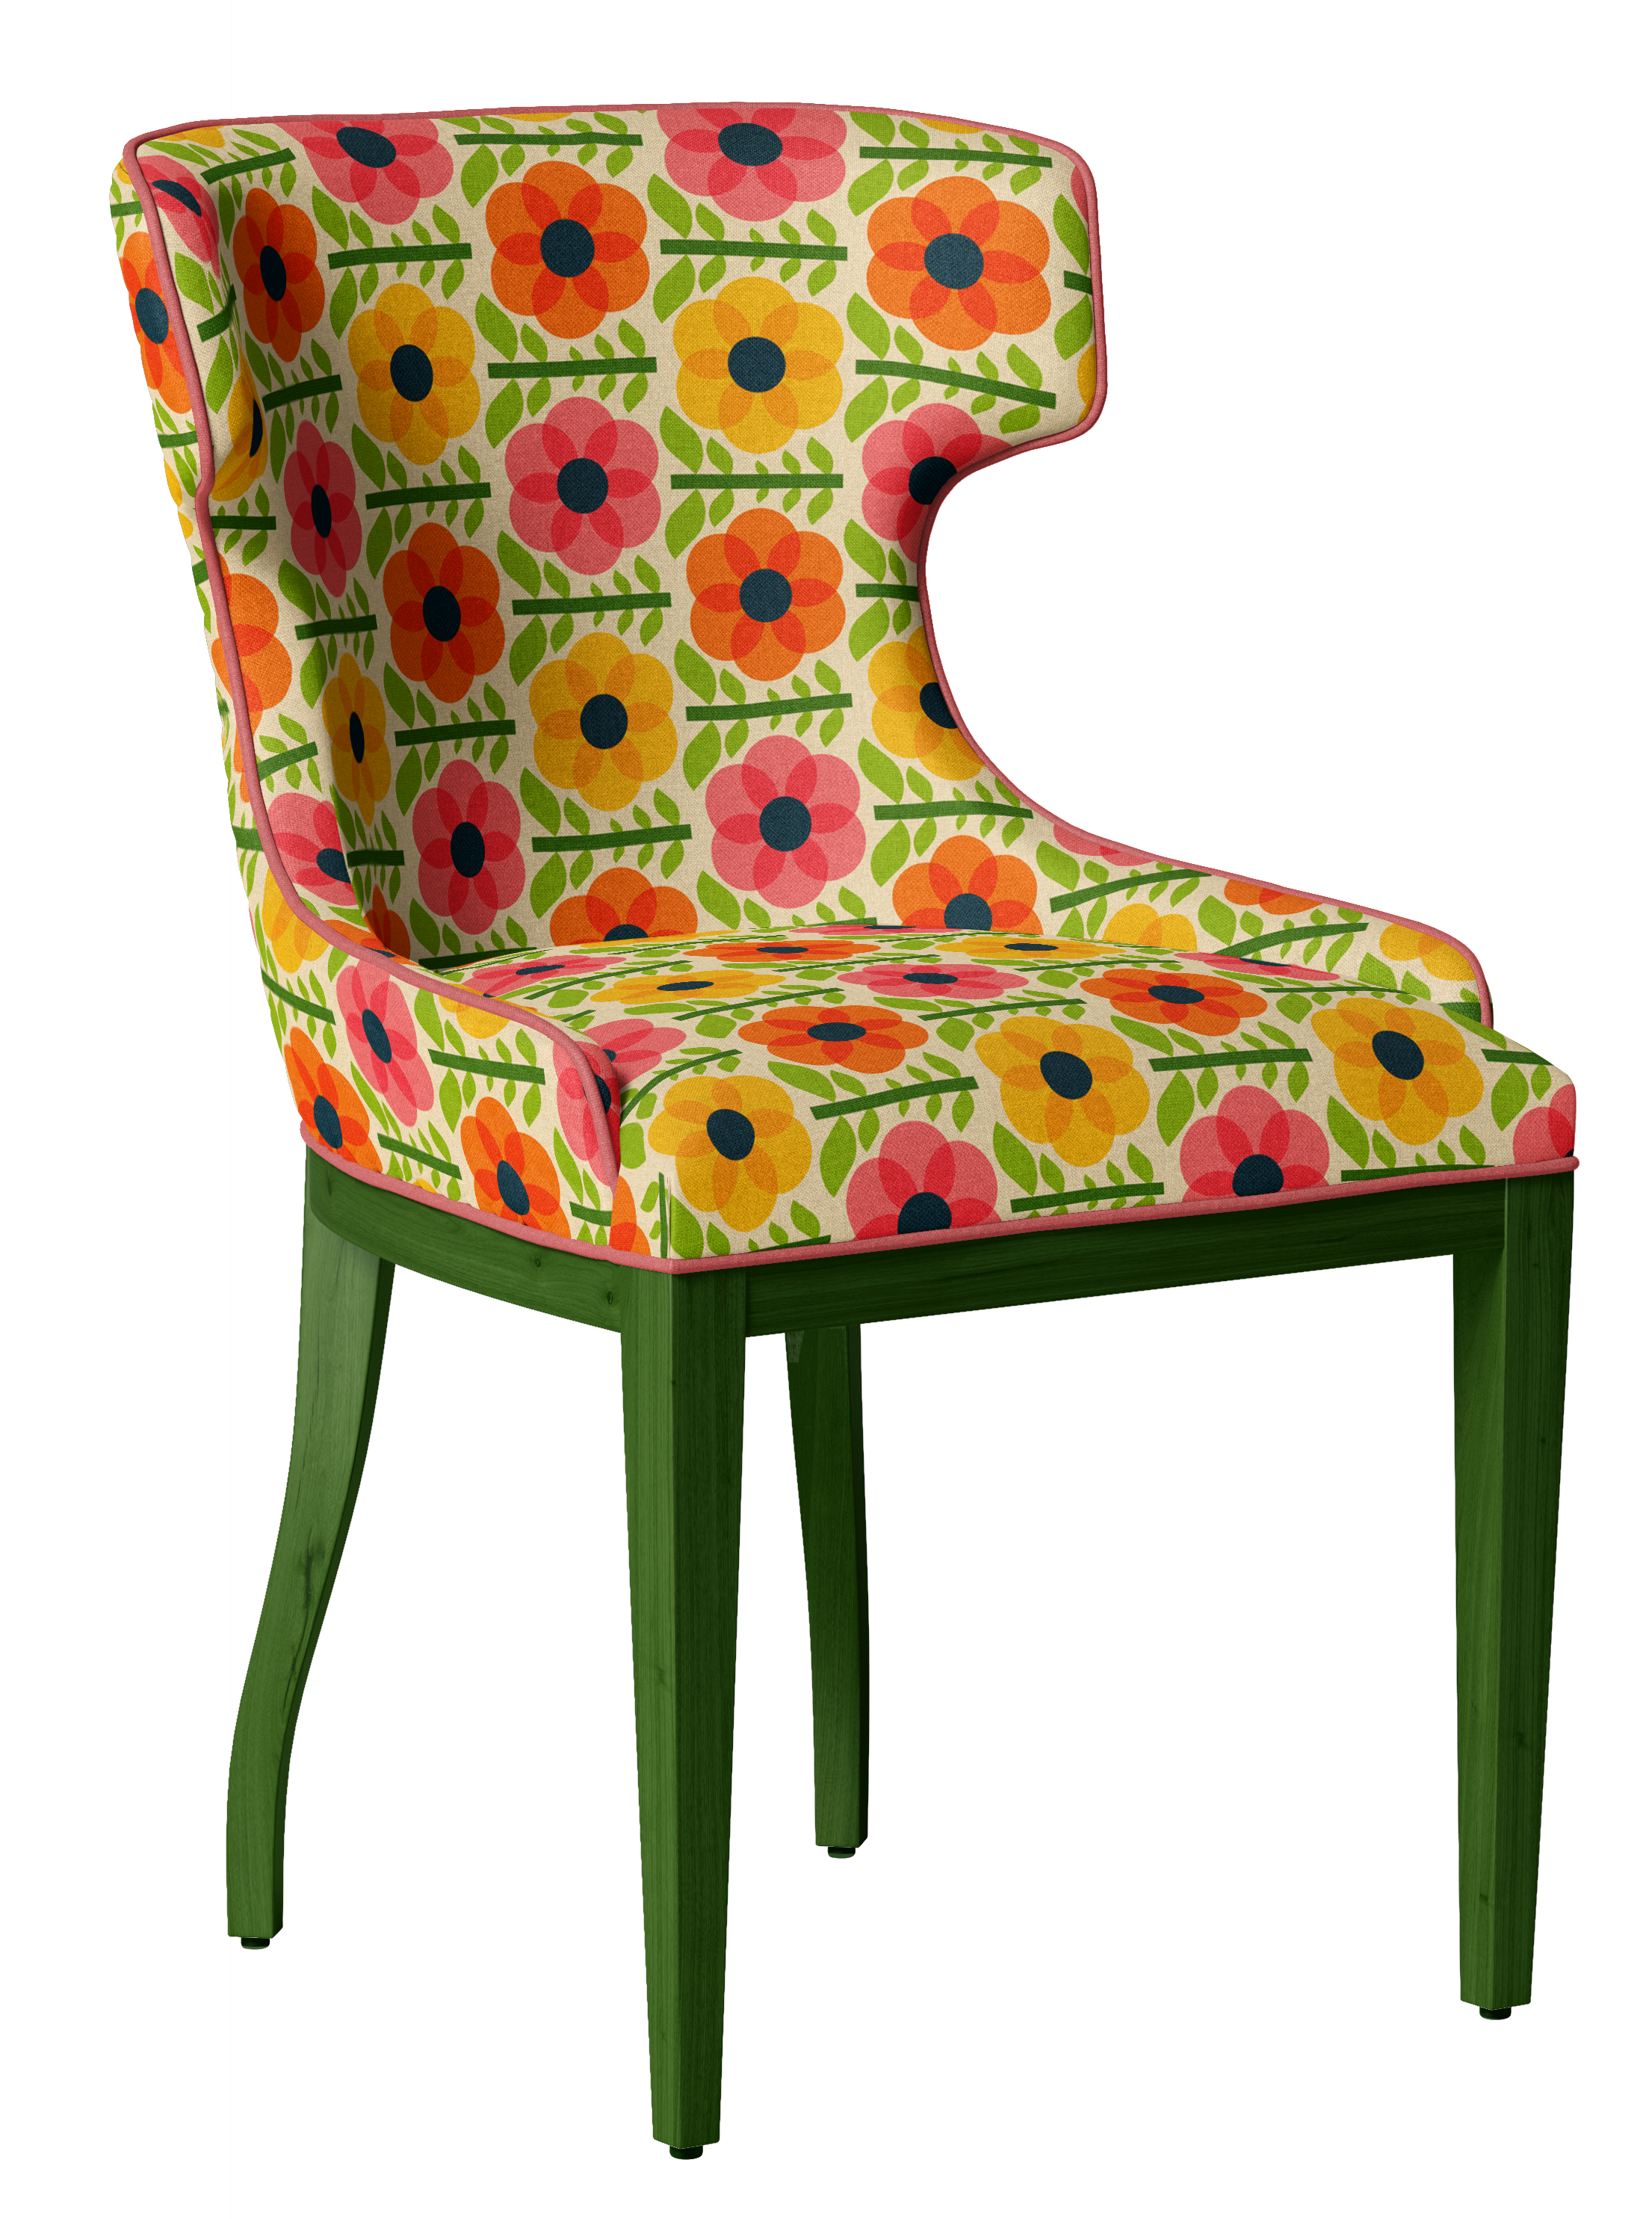 Chair with wrong positioned pattern